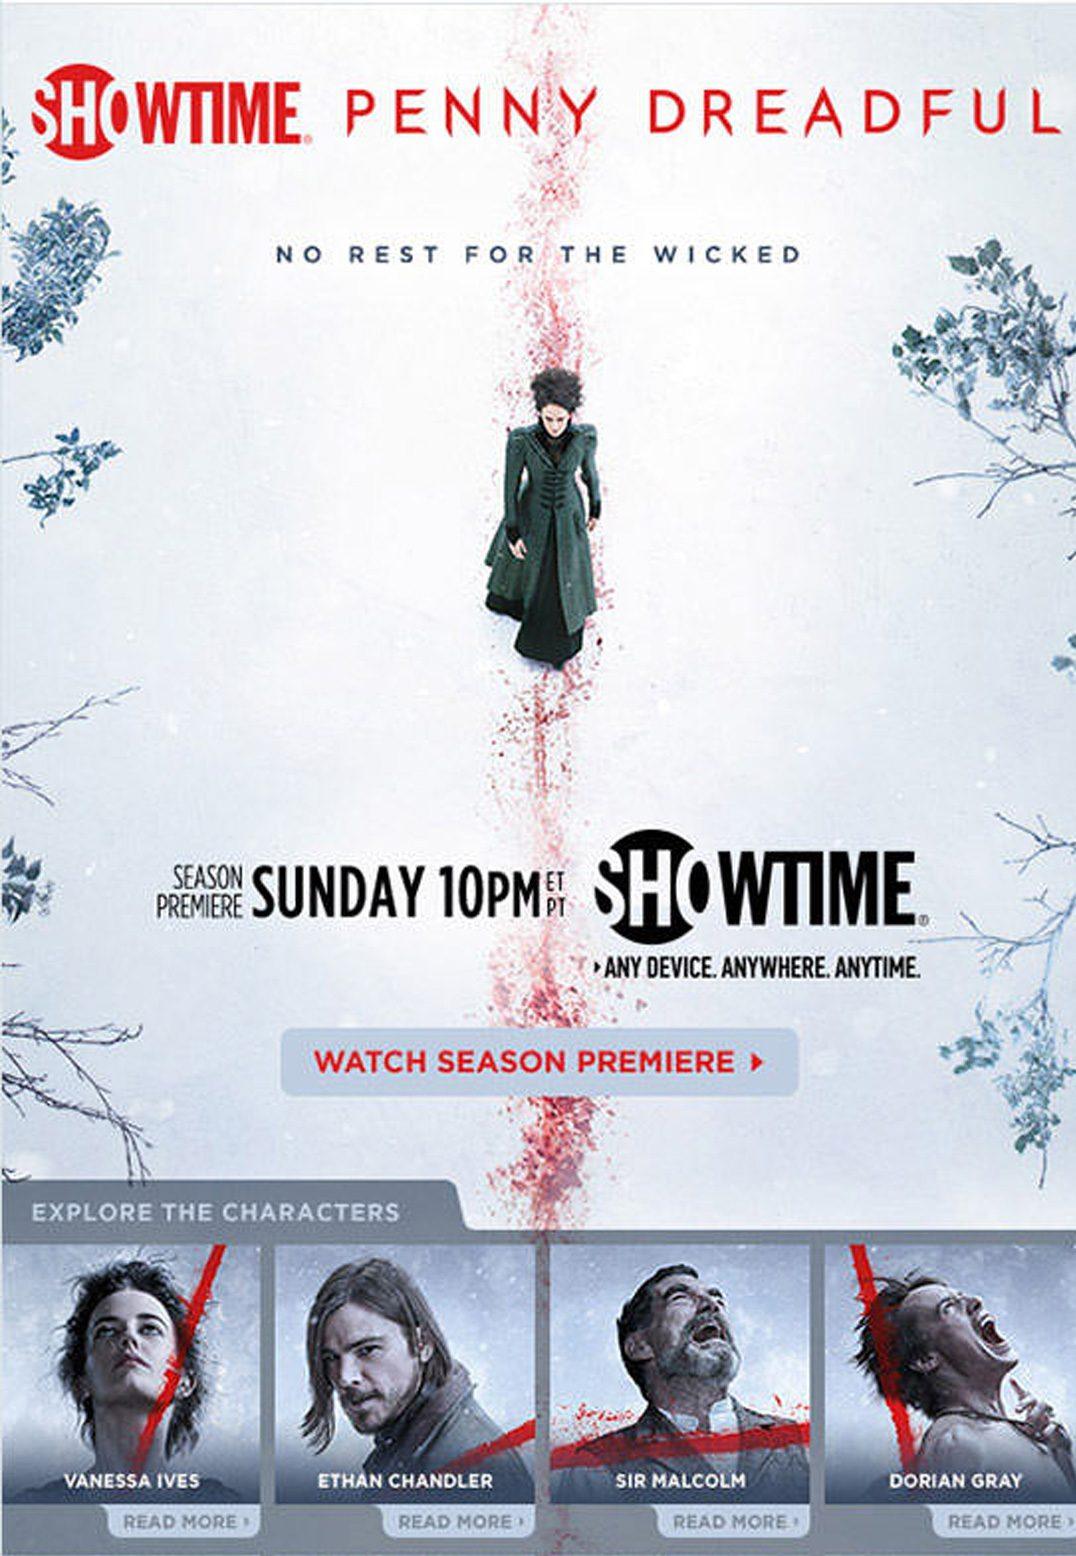 Take this example from Showtime and their promotion of the show Penny Dreadful. The show is set to premiere on a given Sunday at 10 p.m., so if they started sending out messages on Friday at 8 p.m., the email message could easily be missed over thanks to the weekend, and the user stands a higher chance of missing out on the season premiere.